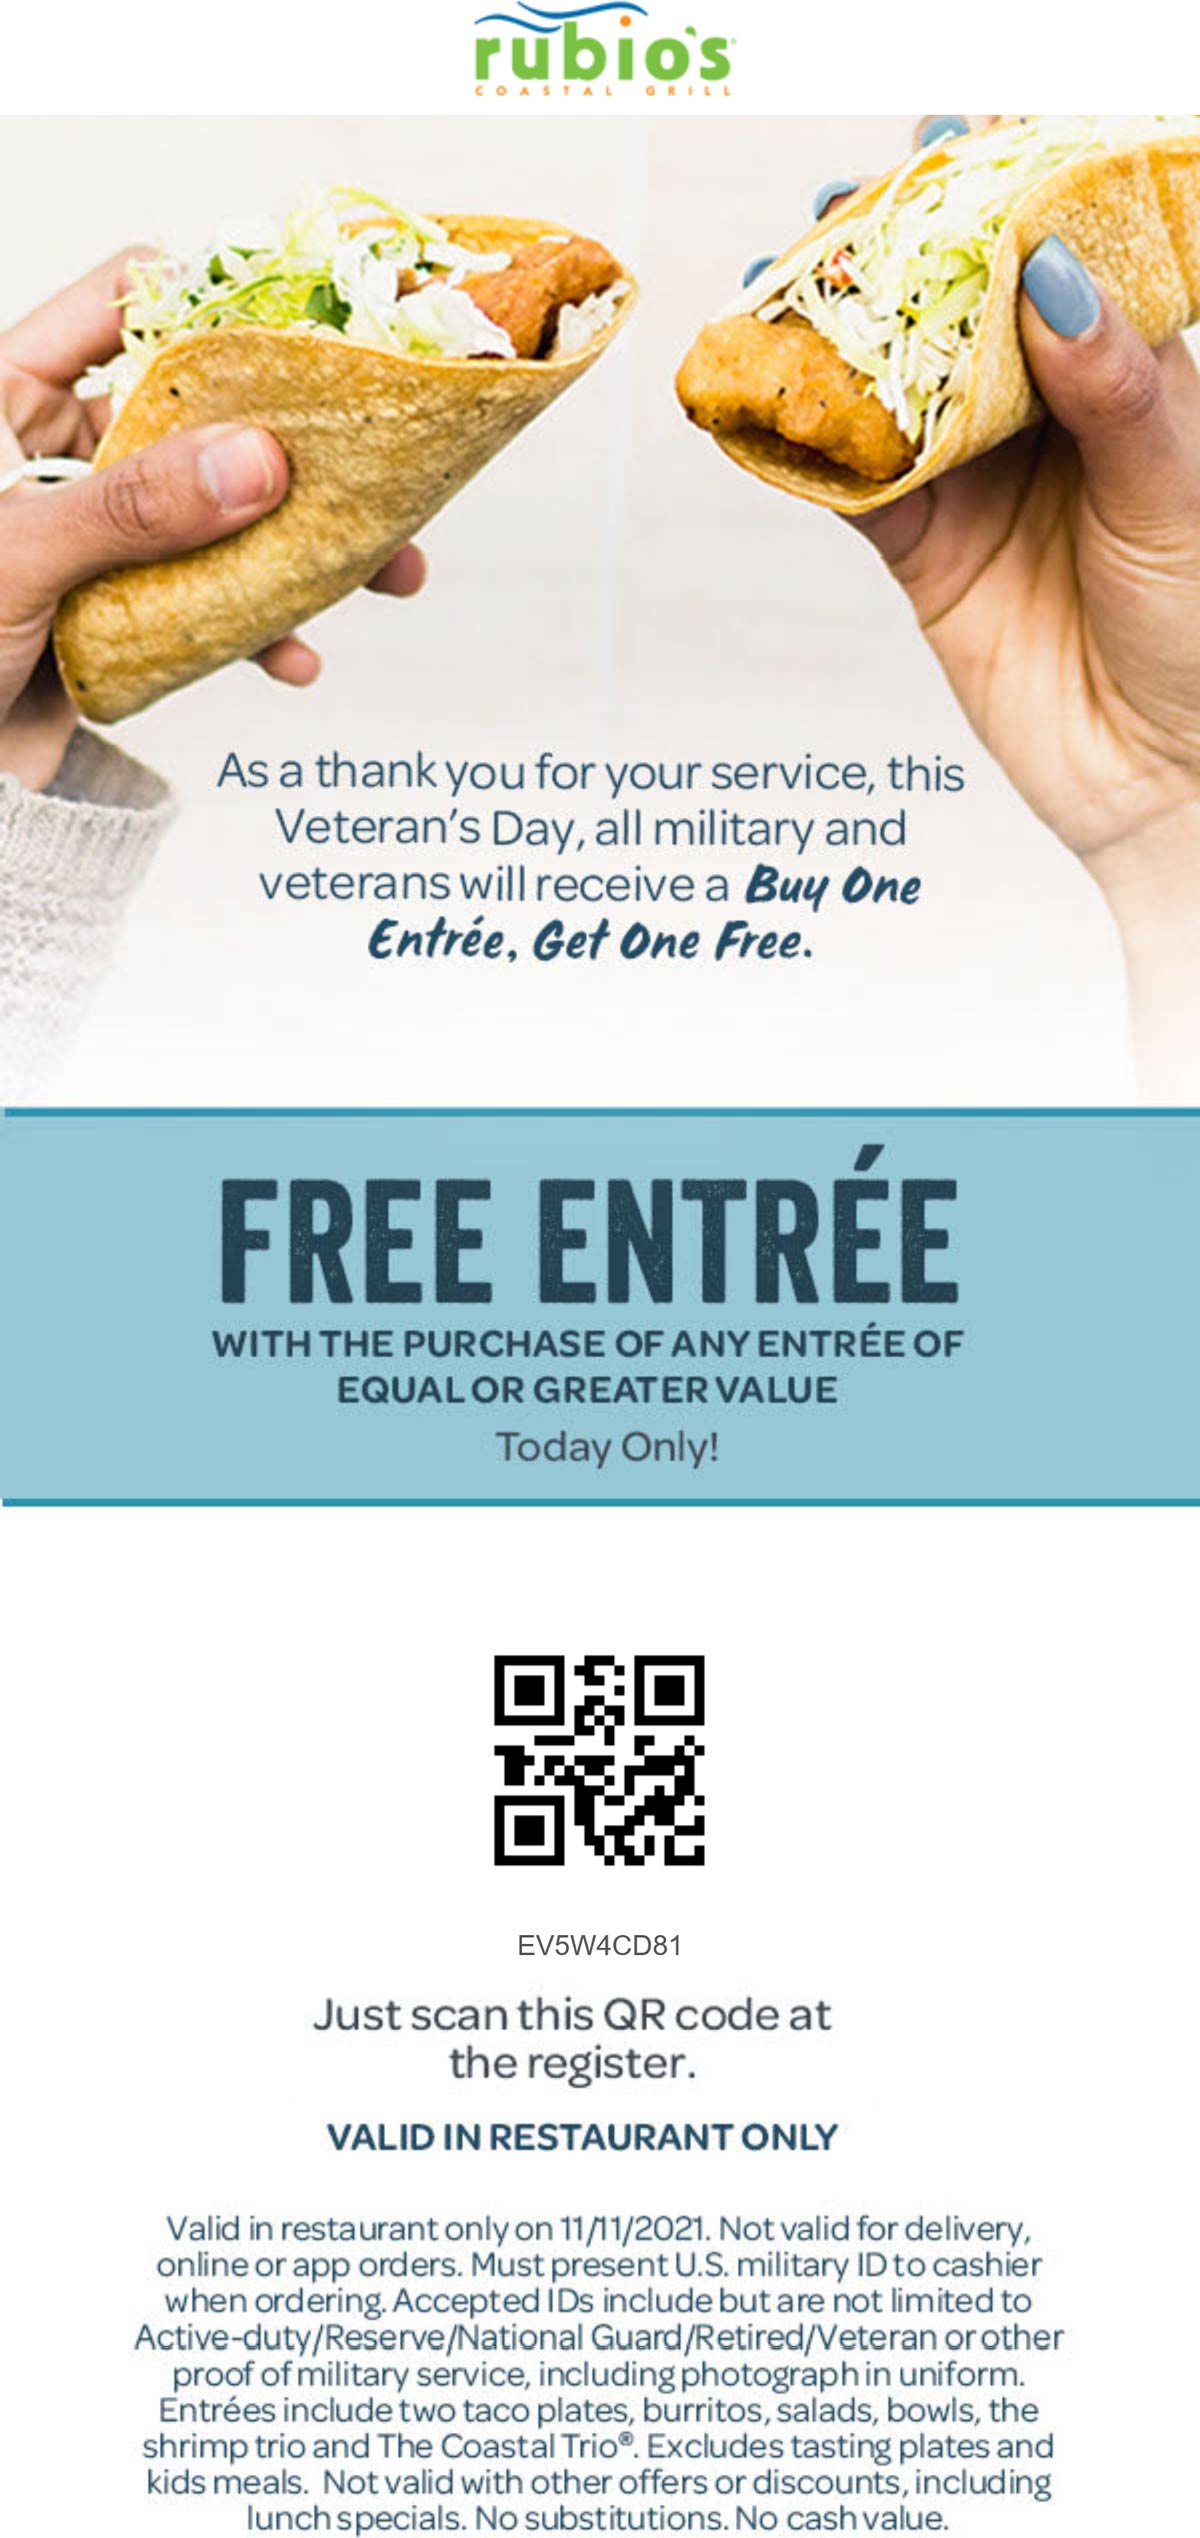 Rubios restaurants Coupon  Second entree free for military & veterans at Rubios Coastal Grill #rubios 